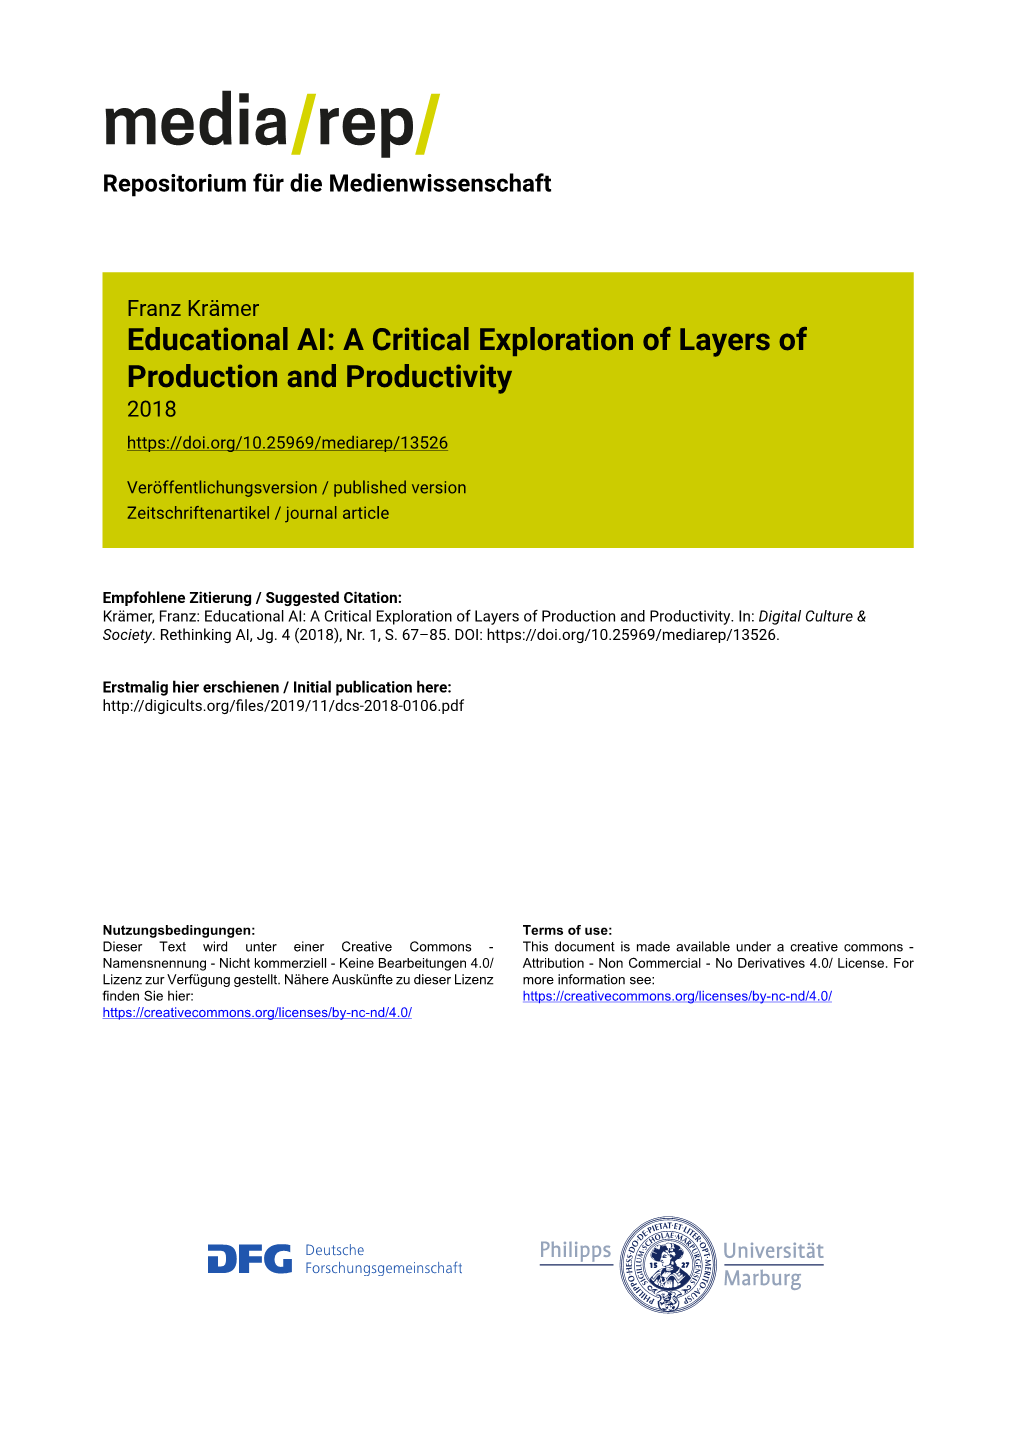 Educational AI: a Critical Exploration of Layers of Production and Productivity 2018